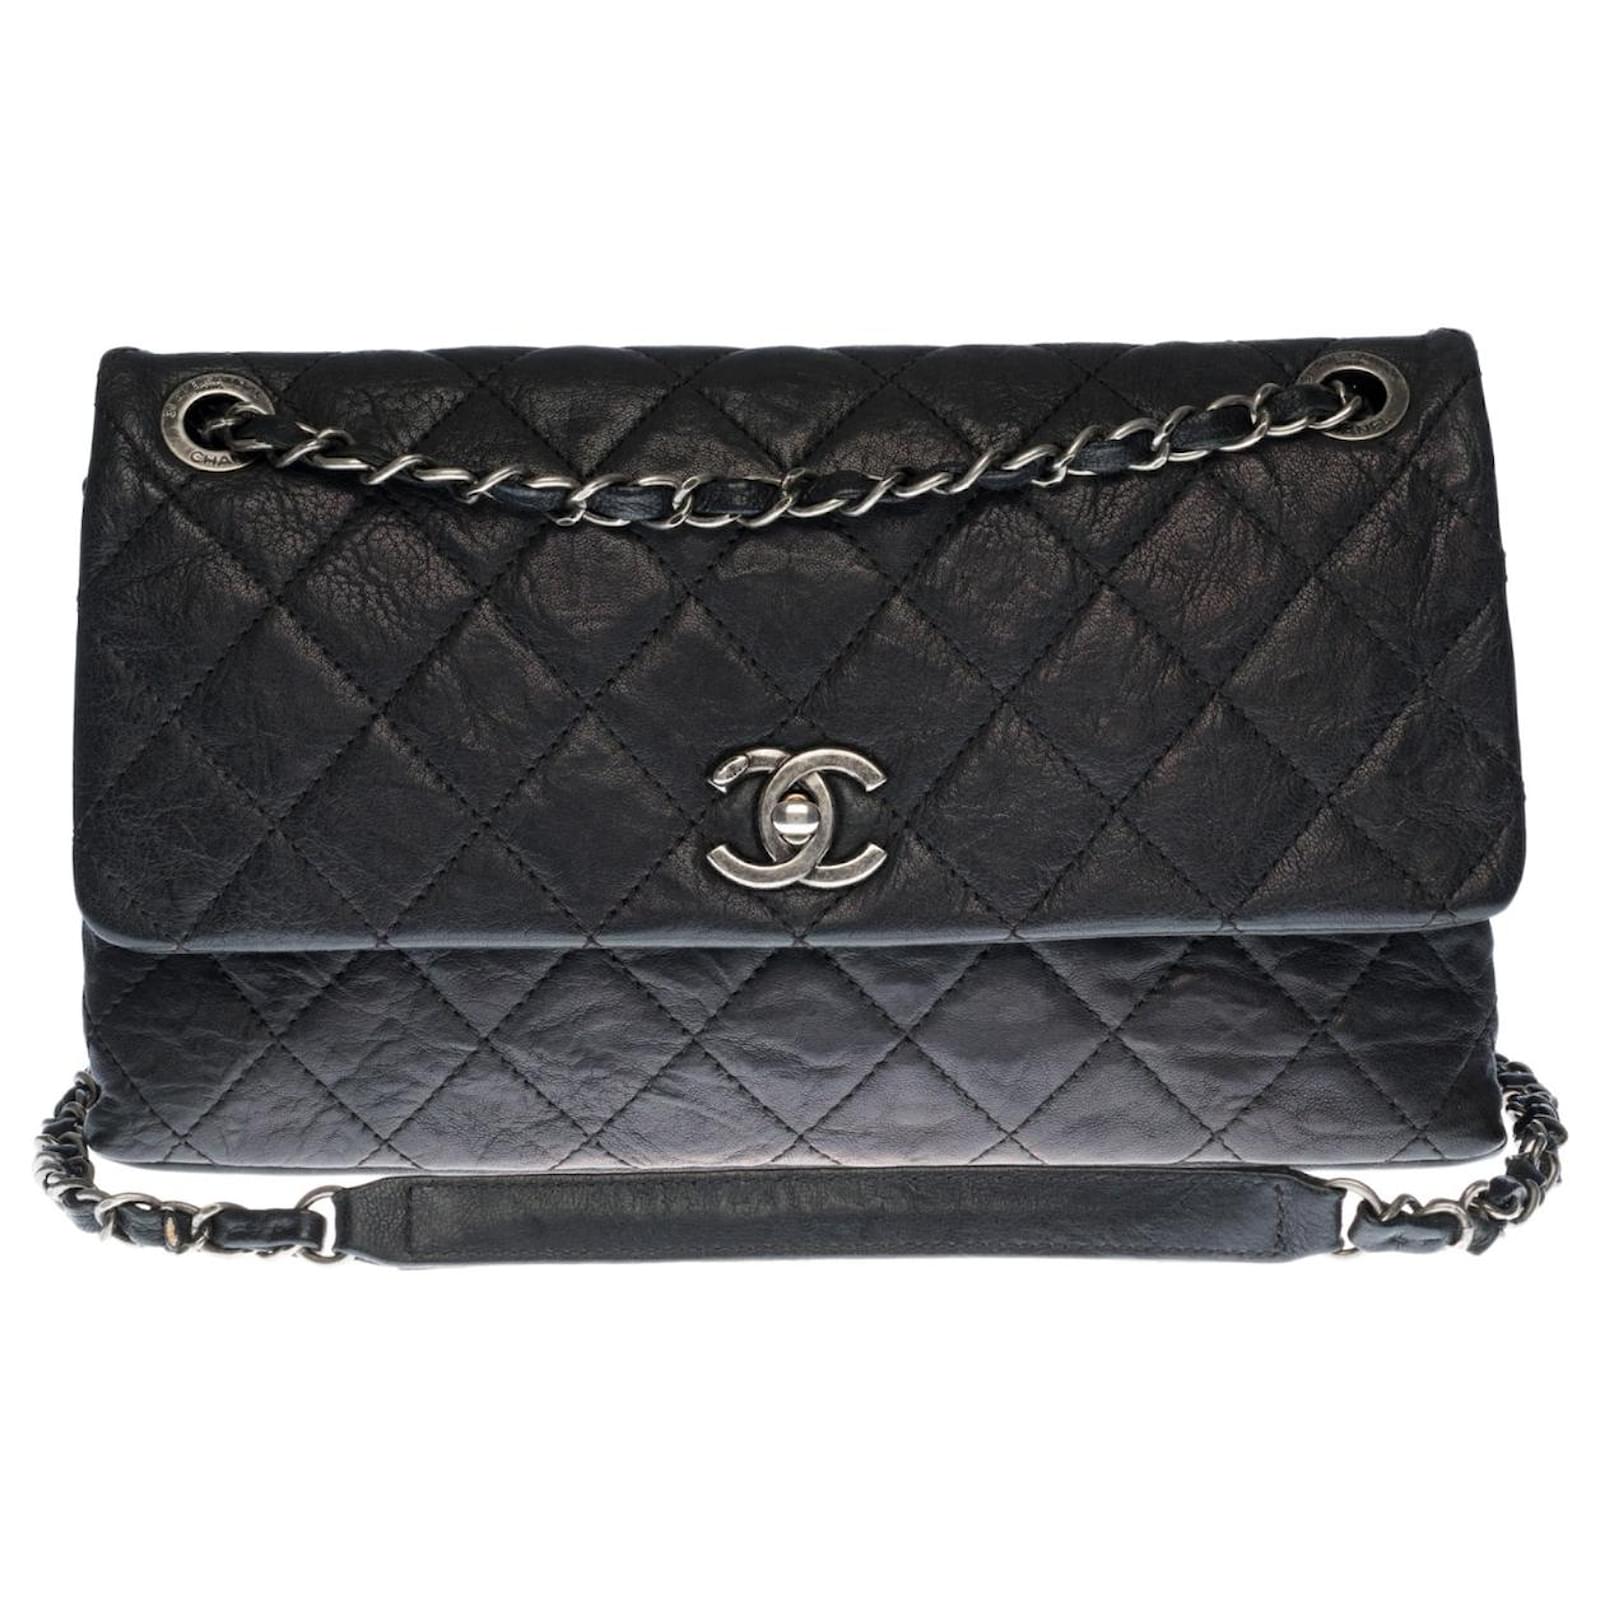 Very chic and Rare classic Chanel shoulder bag 31 rue Cambon single flap  in black quilted leather, antique silver metal trim